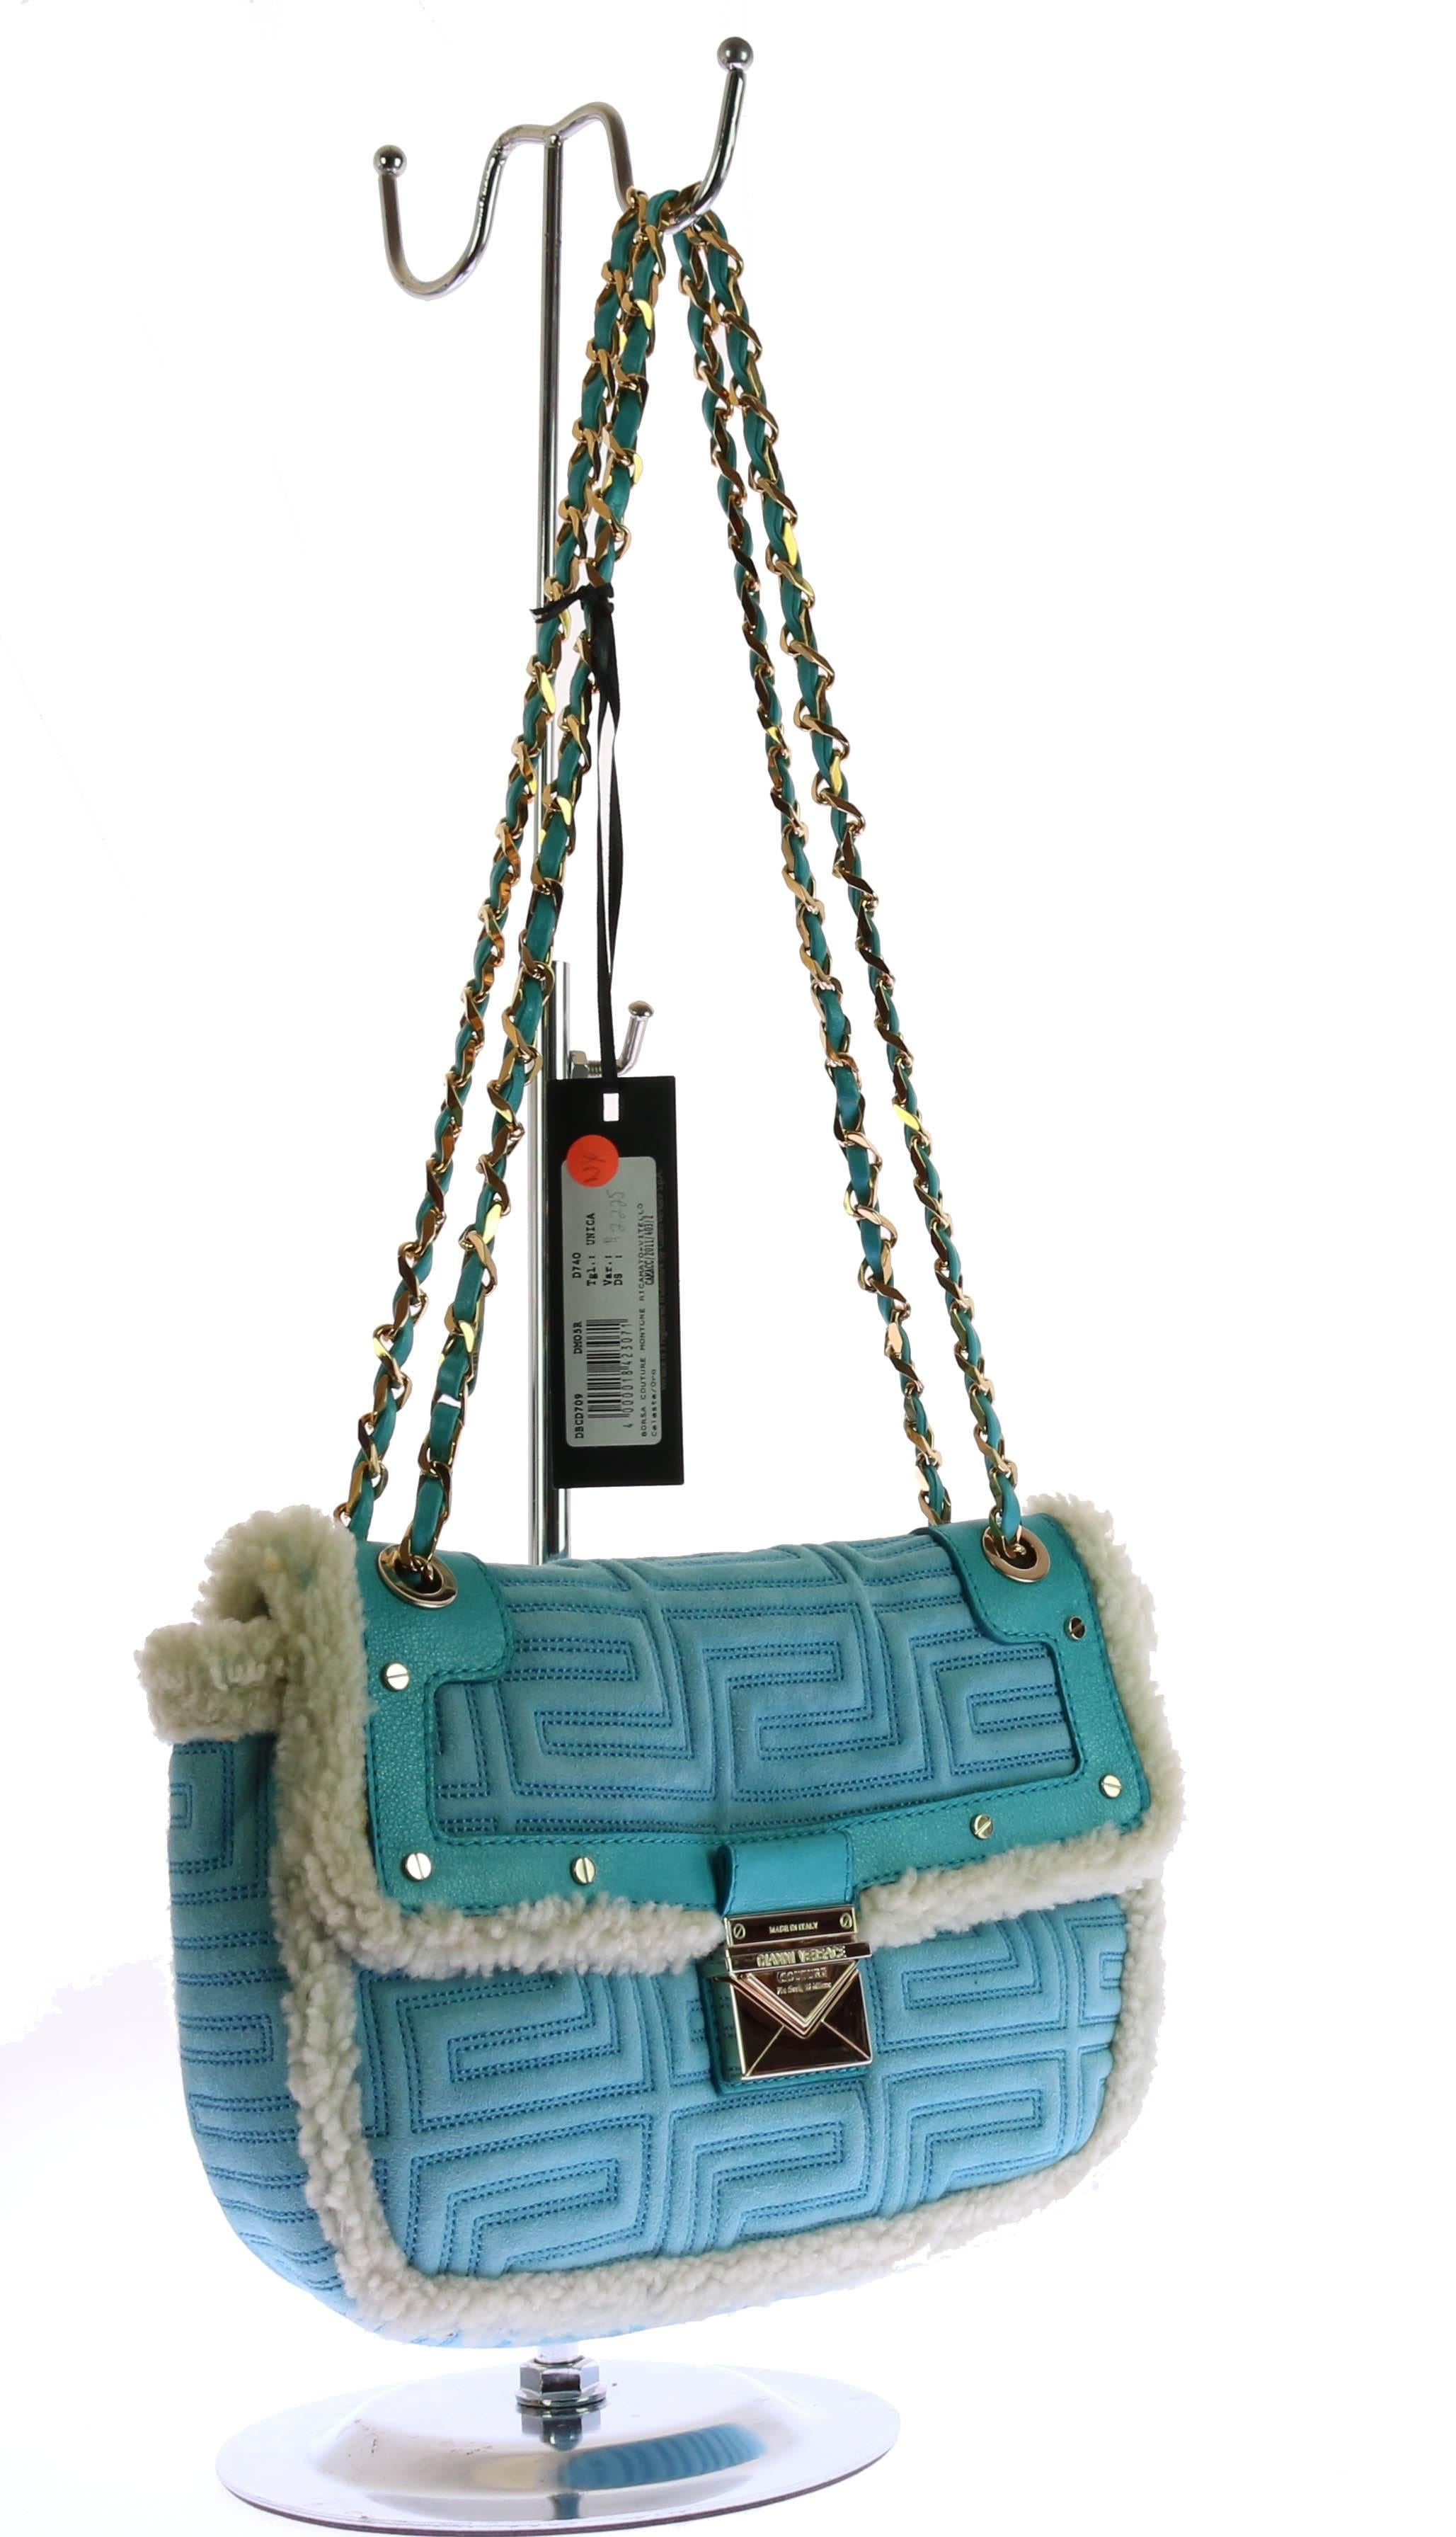 GIANNI VERSACE COUTURE

Quilted  shearling leather shoulder bag with geometric design, small golden metal studs and details, 

golden metal chain and blue leather shoulder strap, 

 golden metal tongue with logo. 

Shearling lining, with